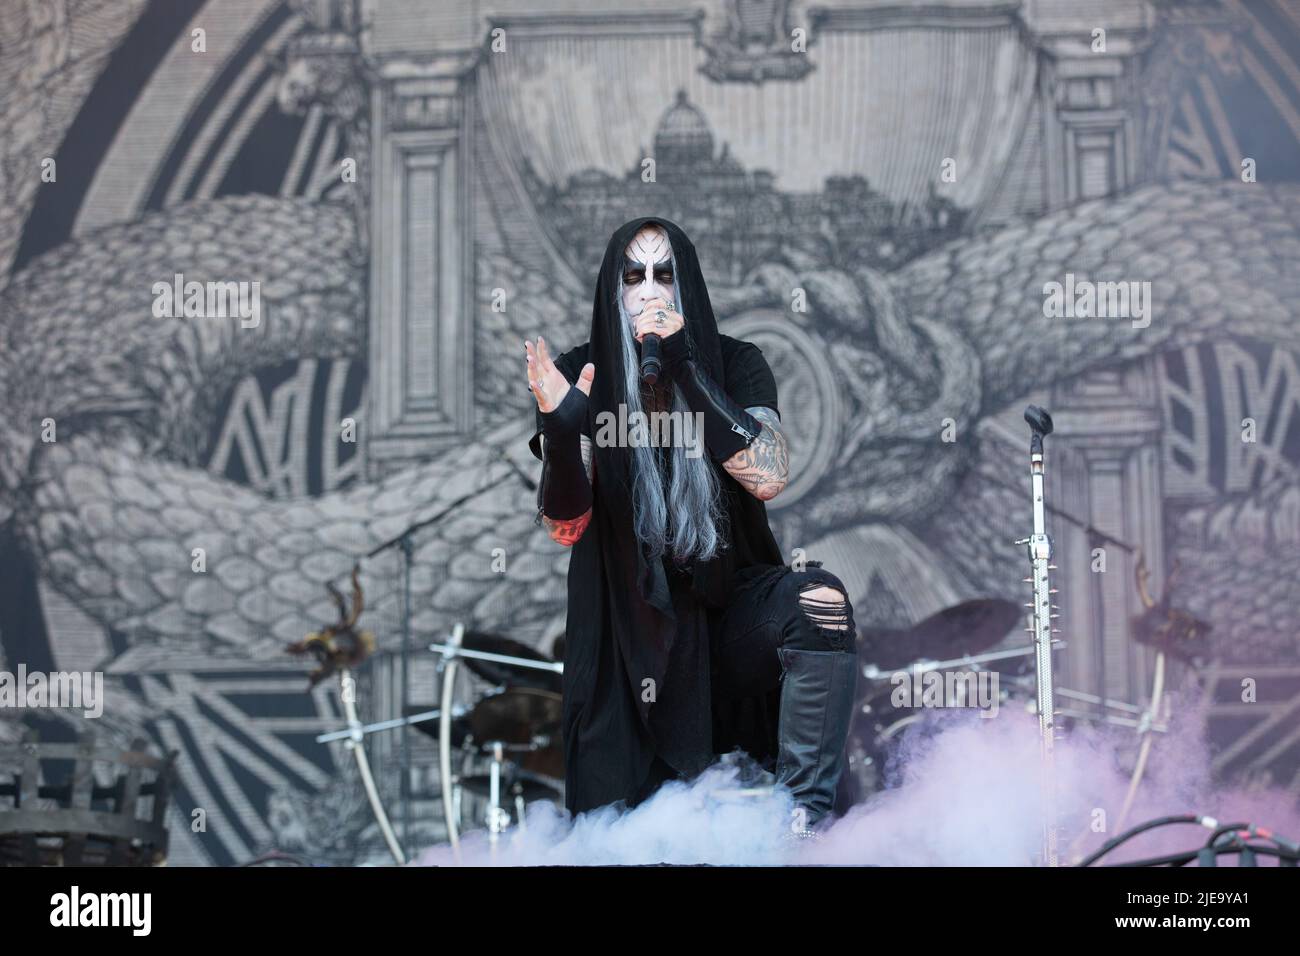 Oslo, Norway. 24th, June 2022. The Norwegian symphonic black metal band Dimmu Borgir performs a live concert during the Norwegian music festival Tons of Rock 2022 in Oslo. Here vocalist Shagrath is seen live on stage. (Photo credit: Gonzales Photo - Per-Otto Oppi). Stock Photo